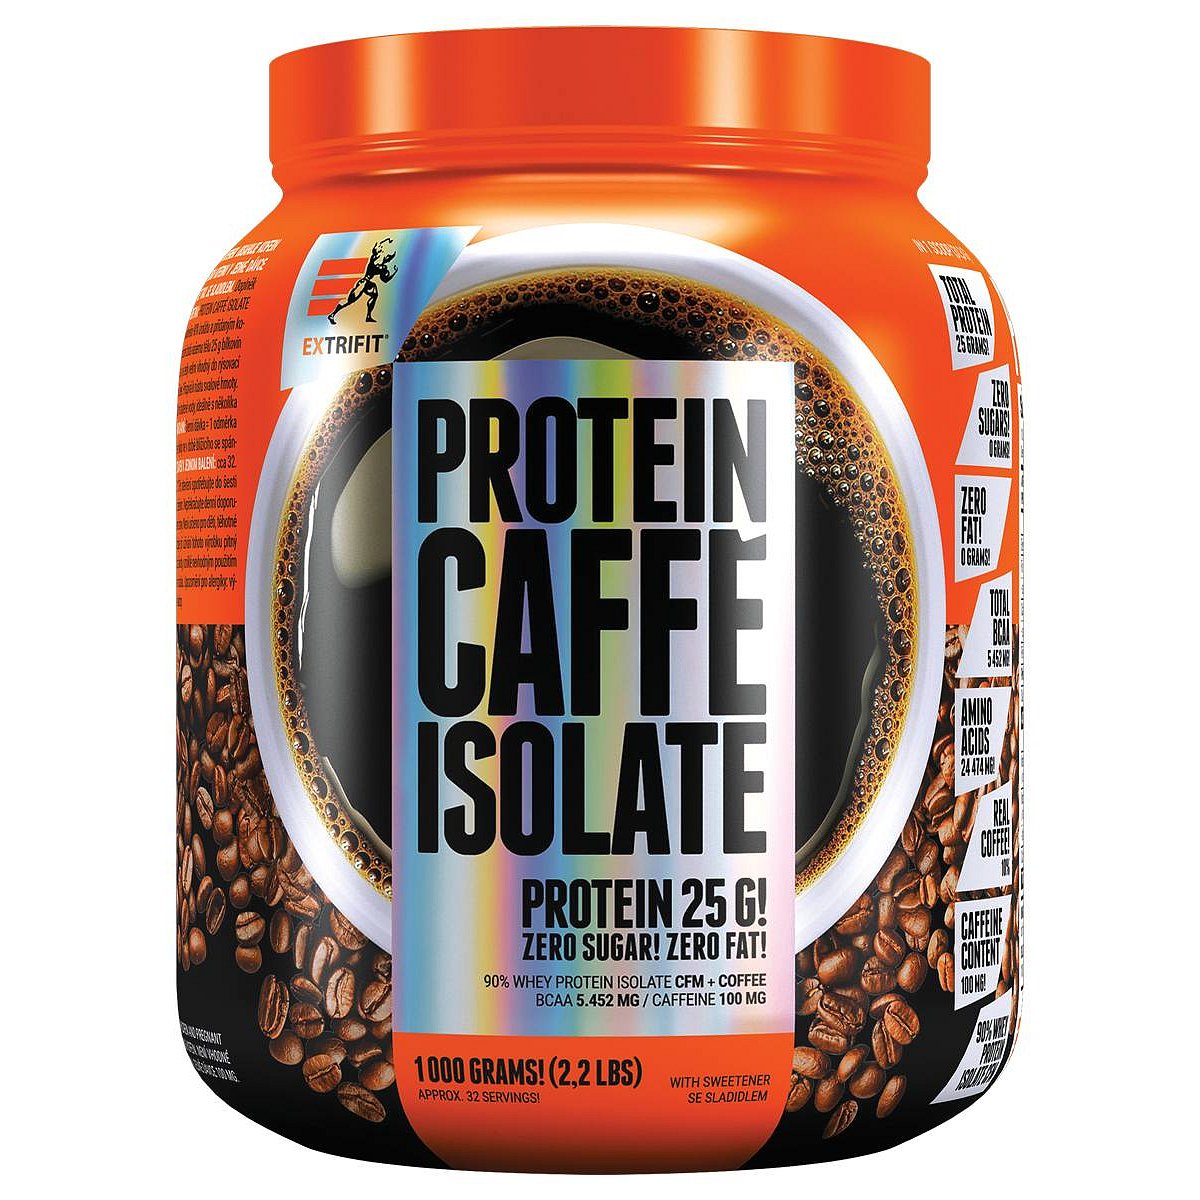 Extrifit Protein Caffe Isolate 1000g